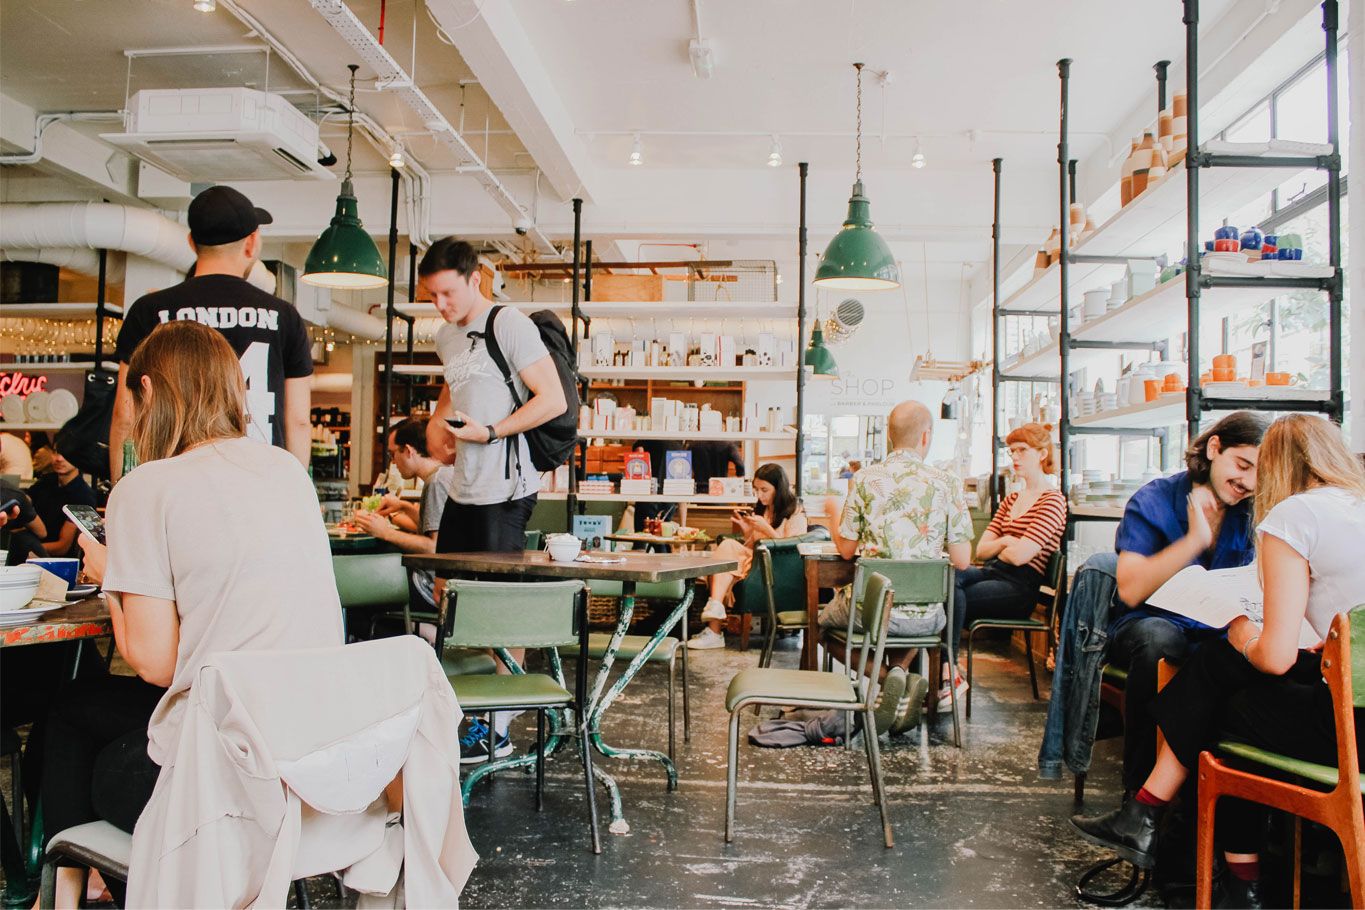  How Can You Increase The Sales & Profit At Your Cafe Or The Restaurant?